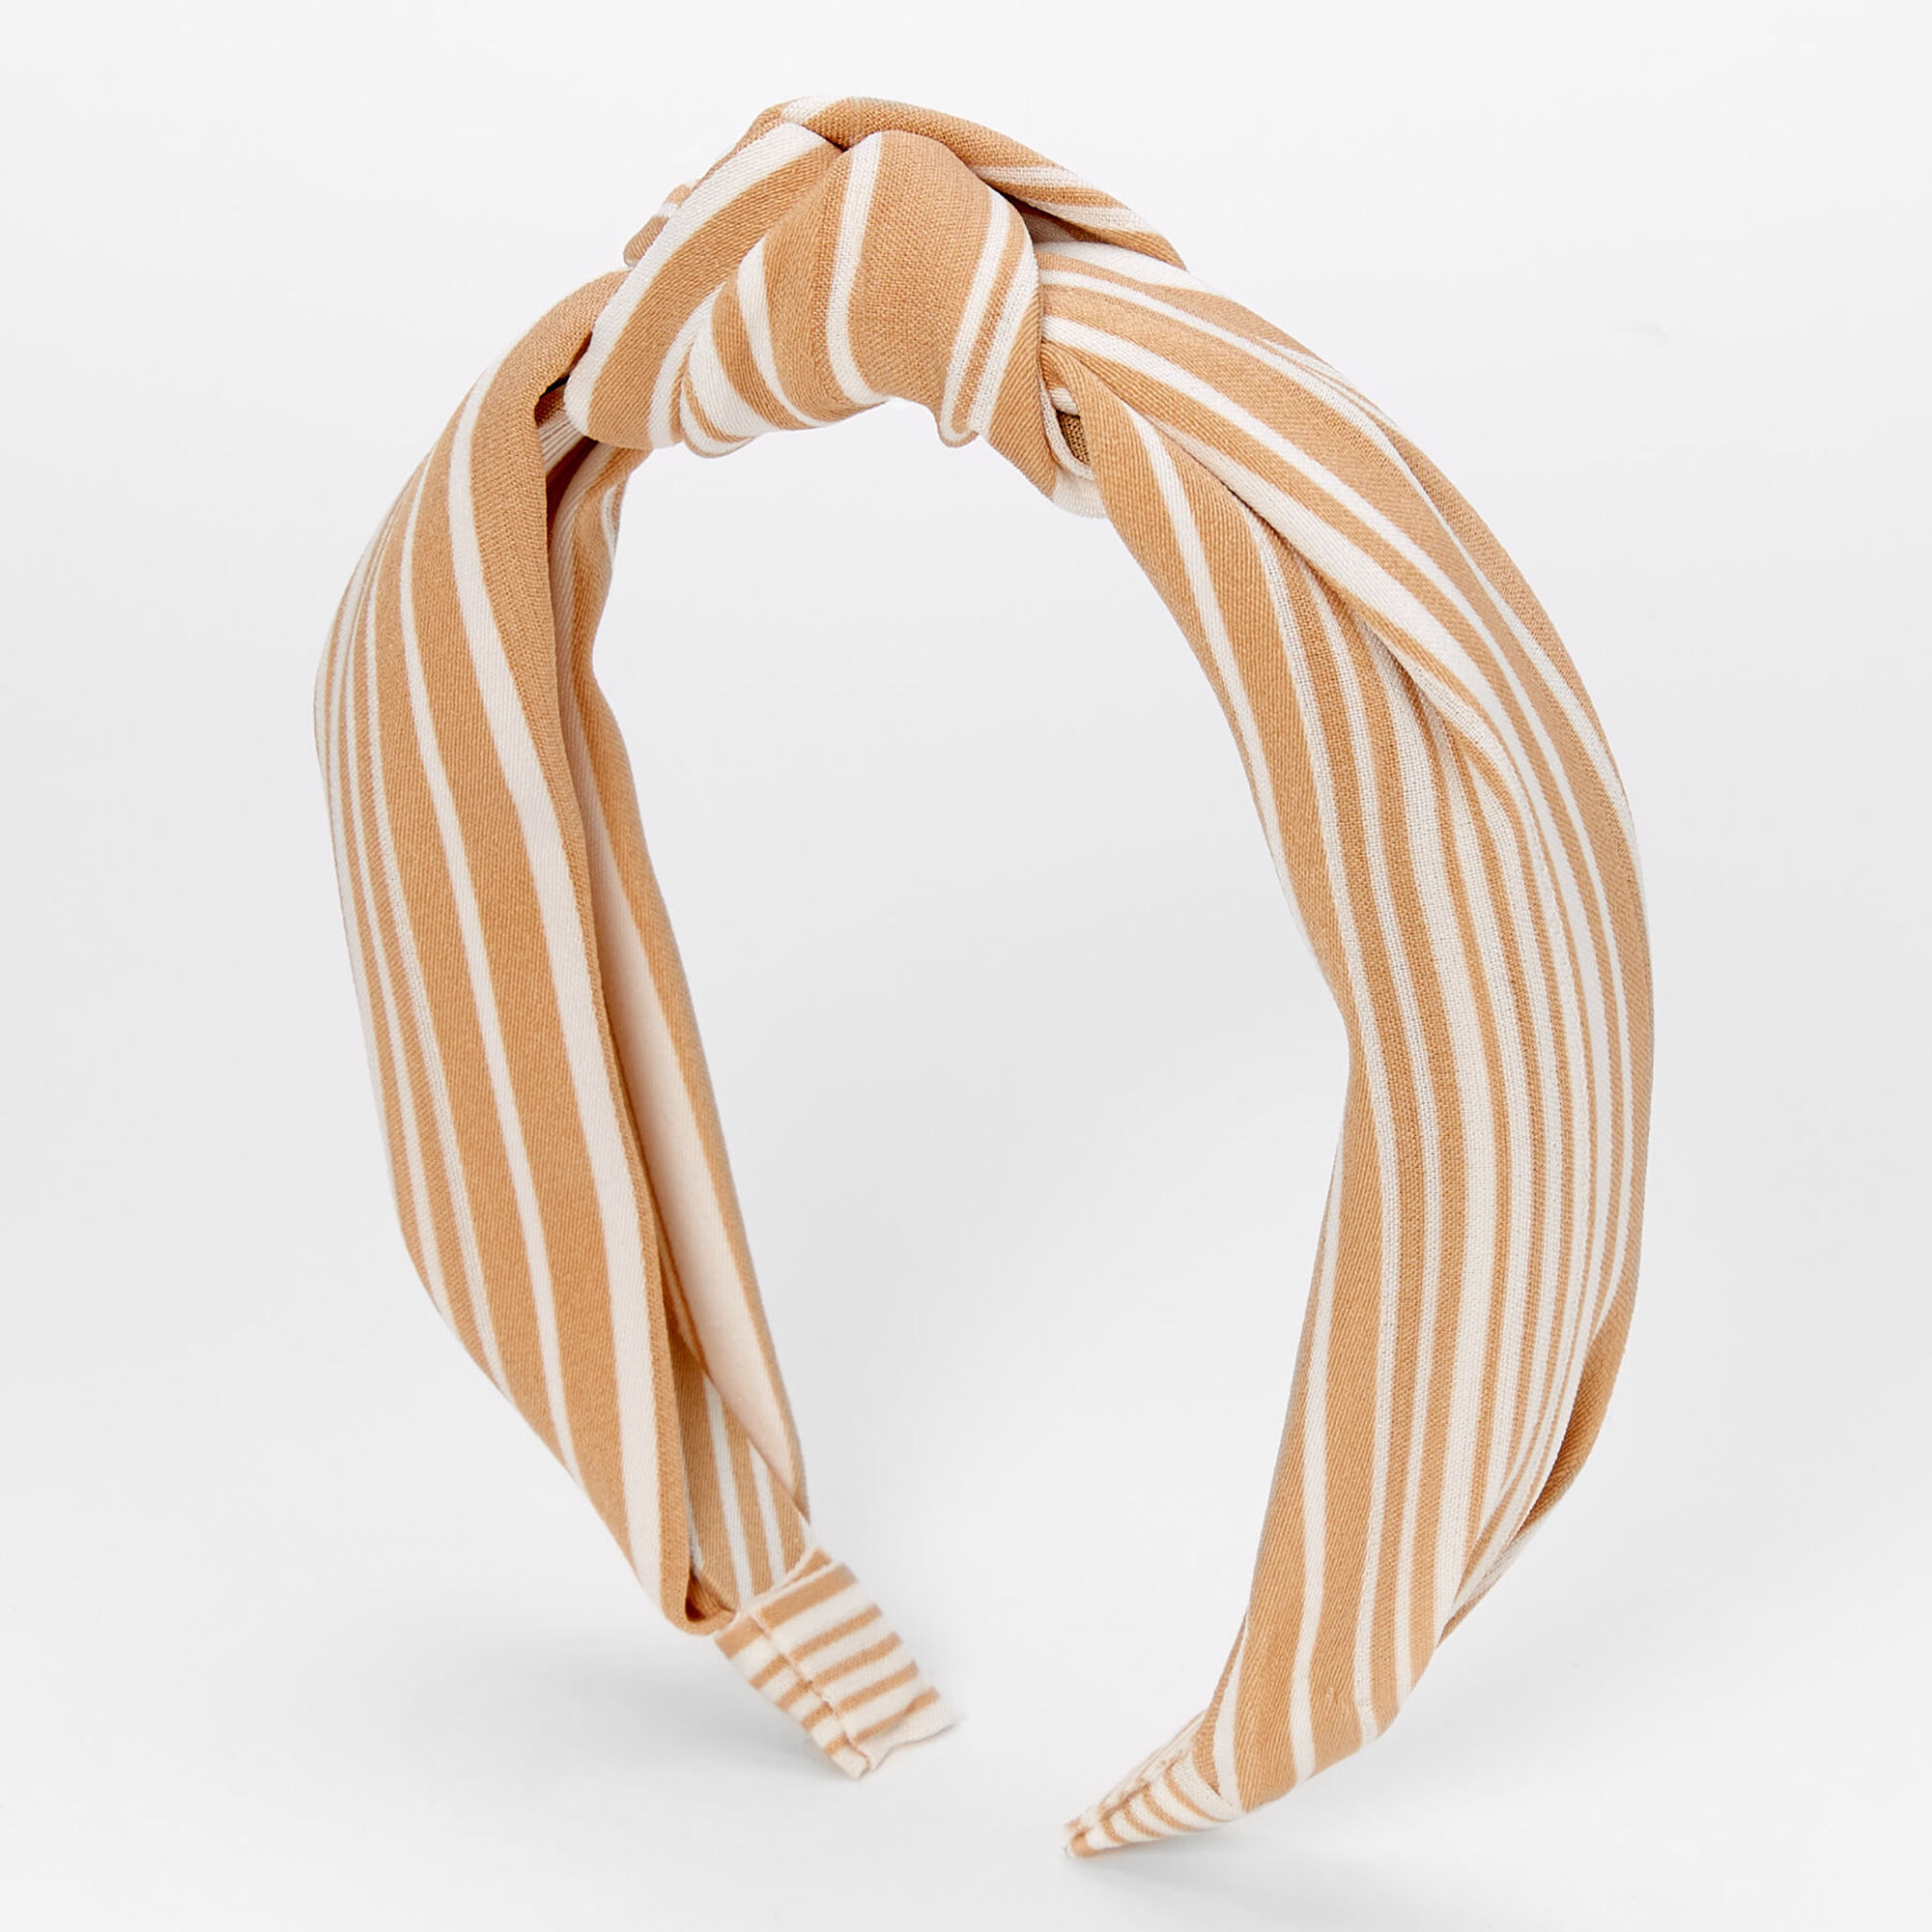 View Claires Nude Striped Knotted Headband White information